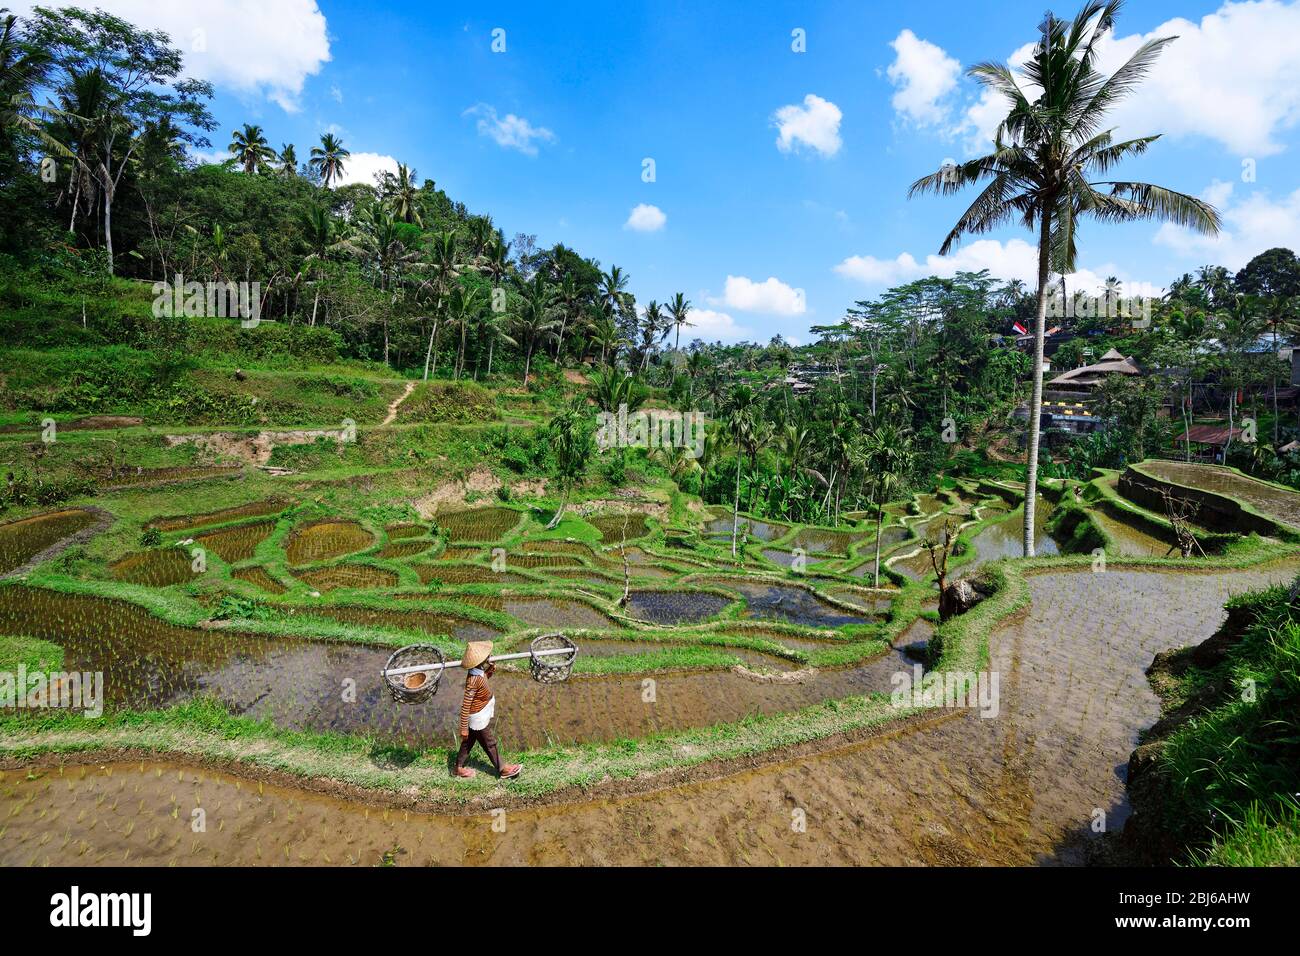 Rice farmer in the rice paddies of Tegallalang, Ubud, Bali, Indonesia Stock Photo